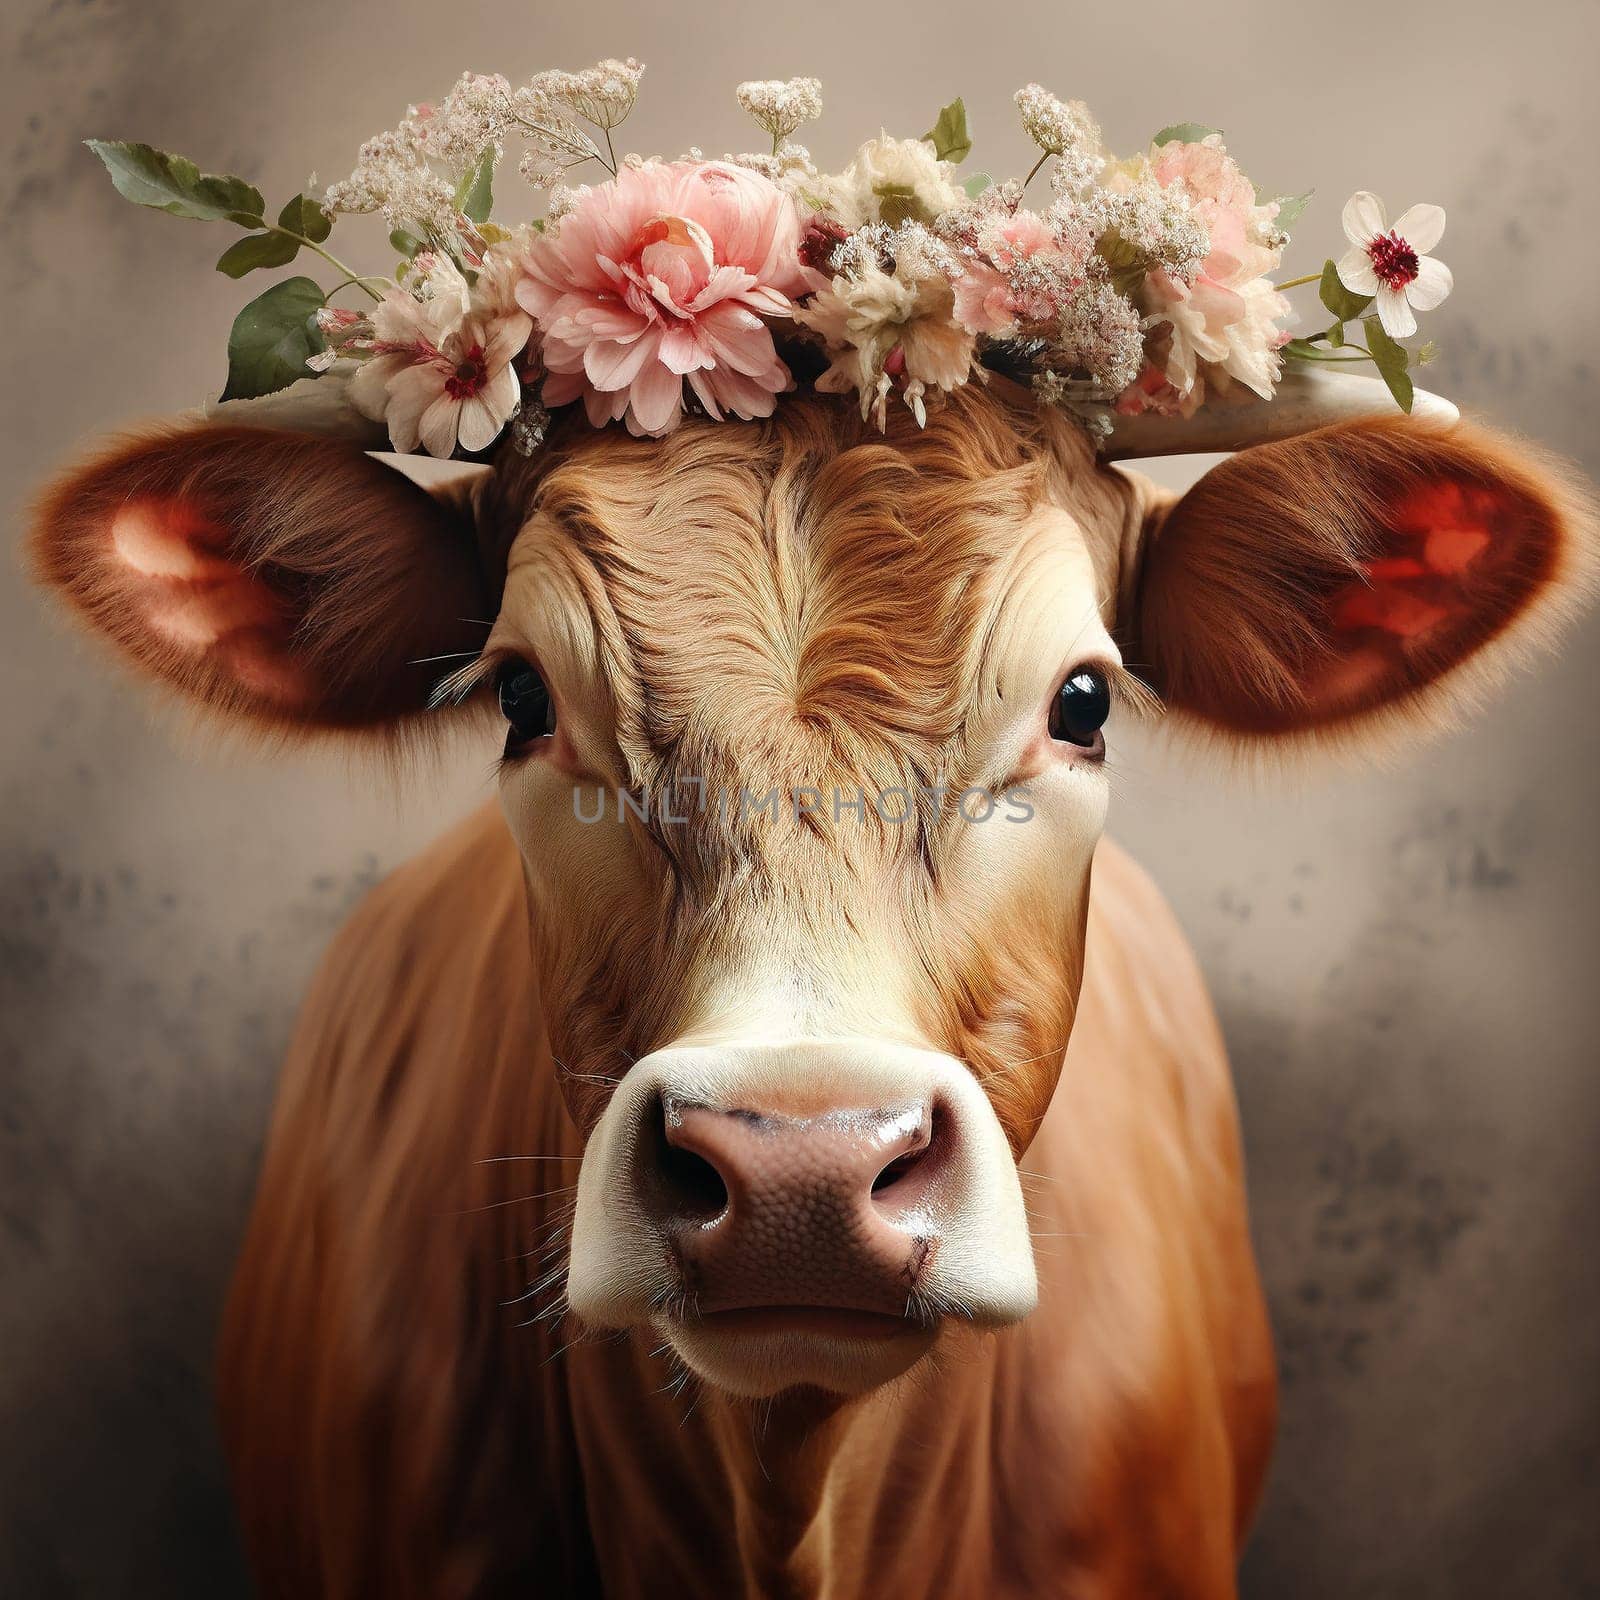 Portrait of a cow with big horns. Close-up of the muzzle of a cow decorated with bright flowers by ekaterinabyuksel